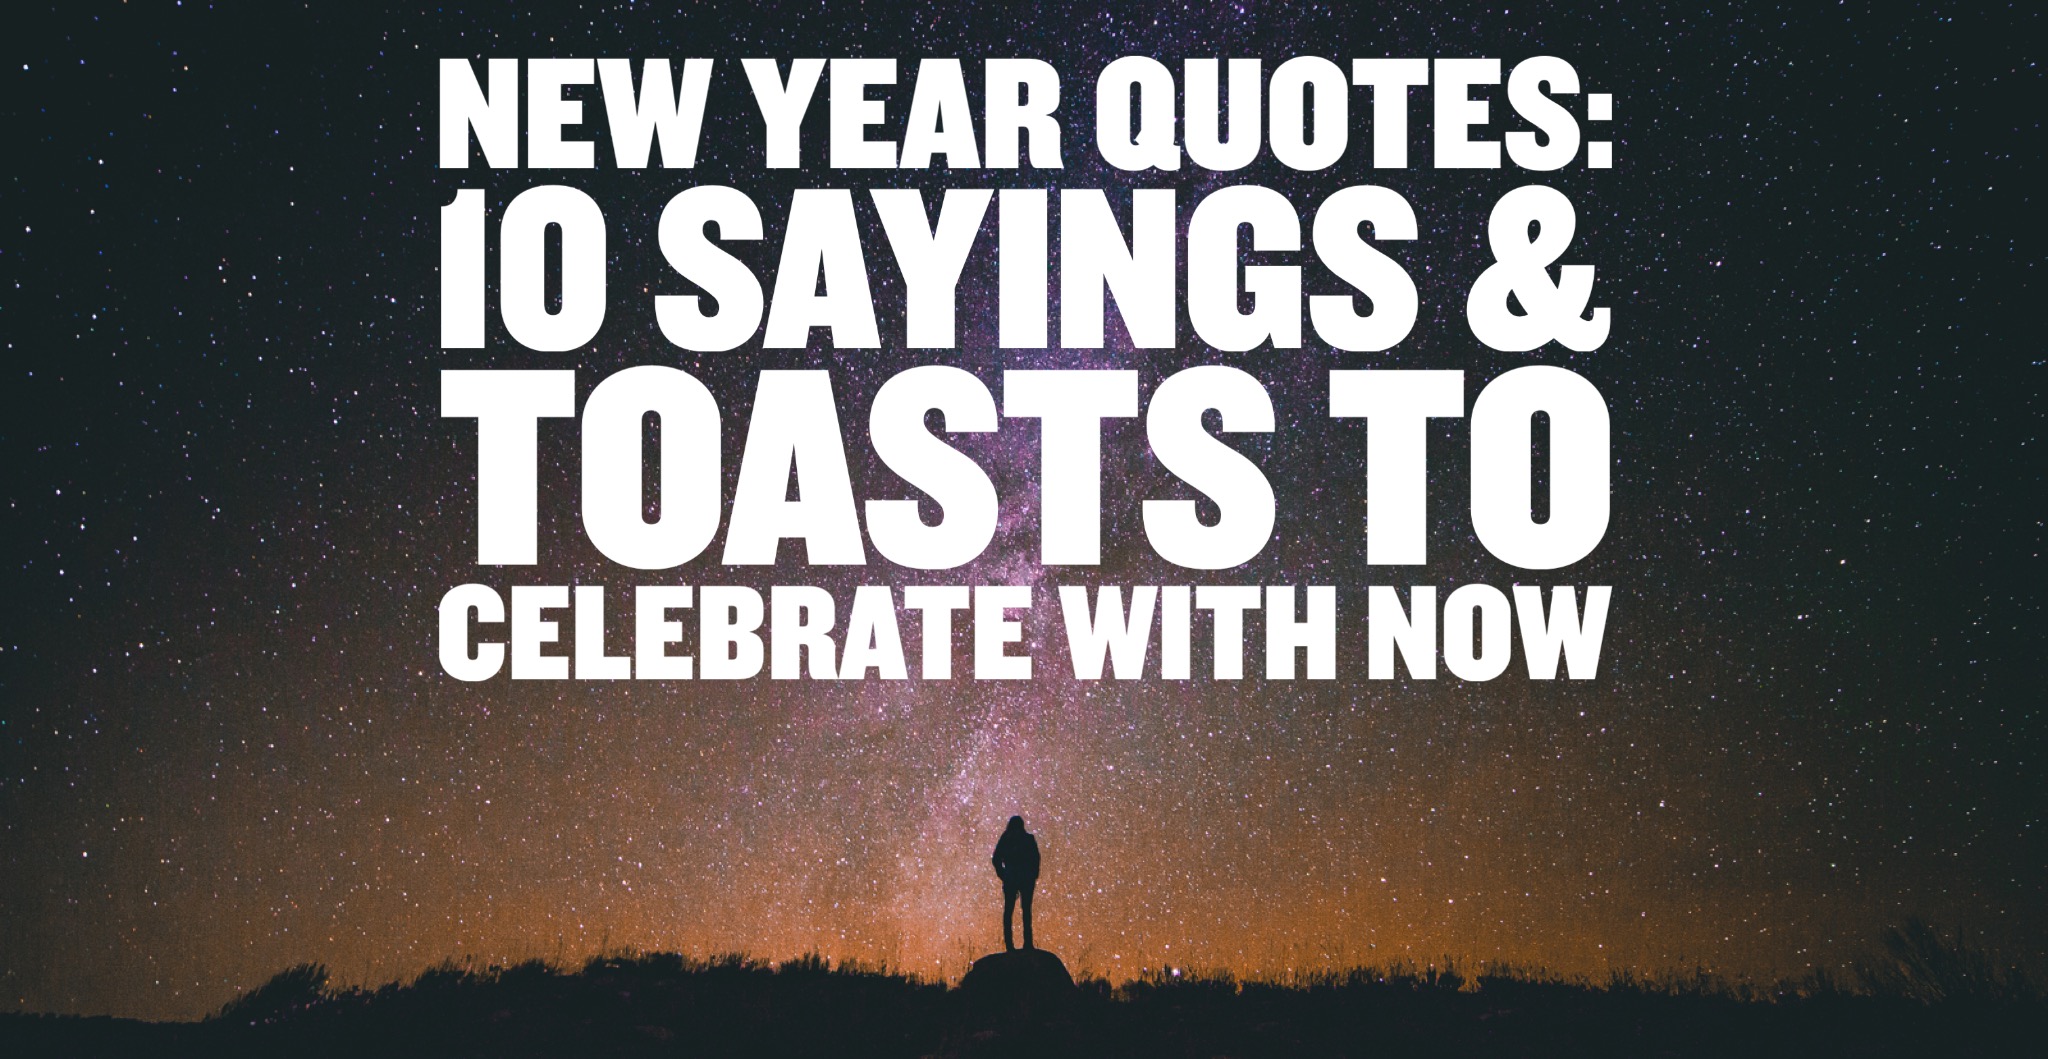 New Year Quotes 10 Sayings & Toasts To Celebrate With